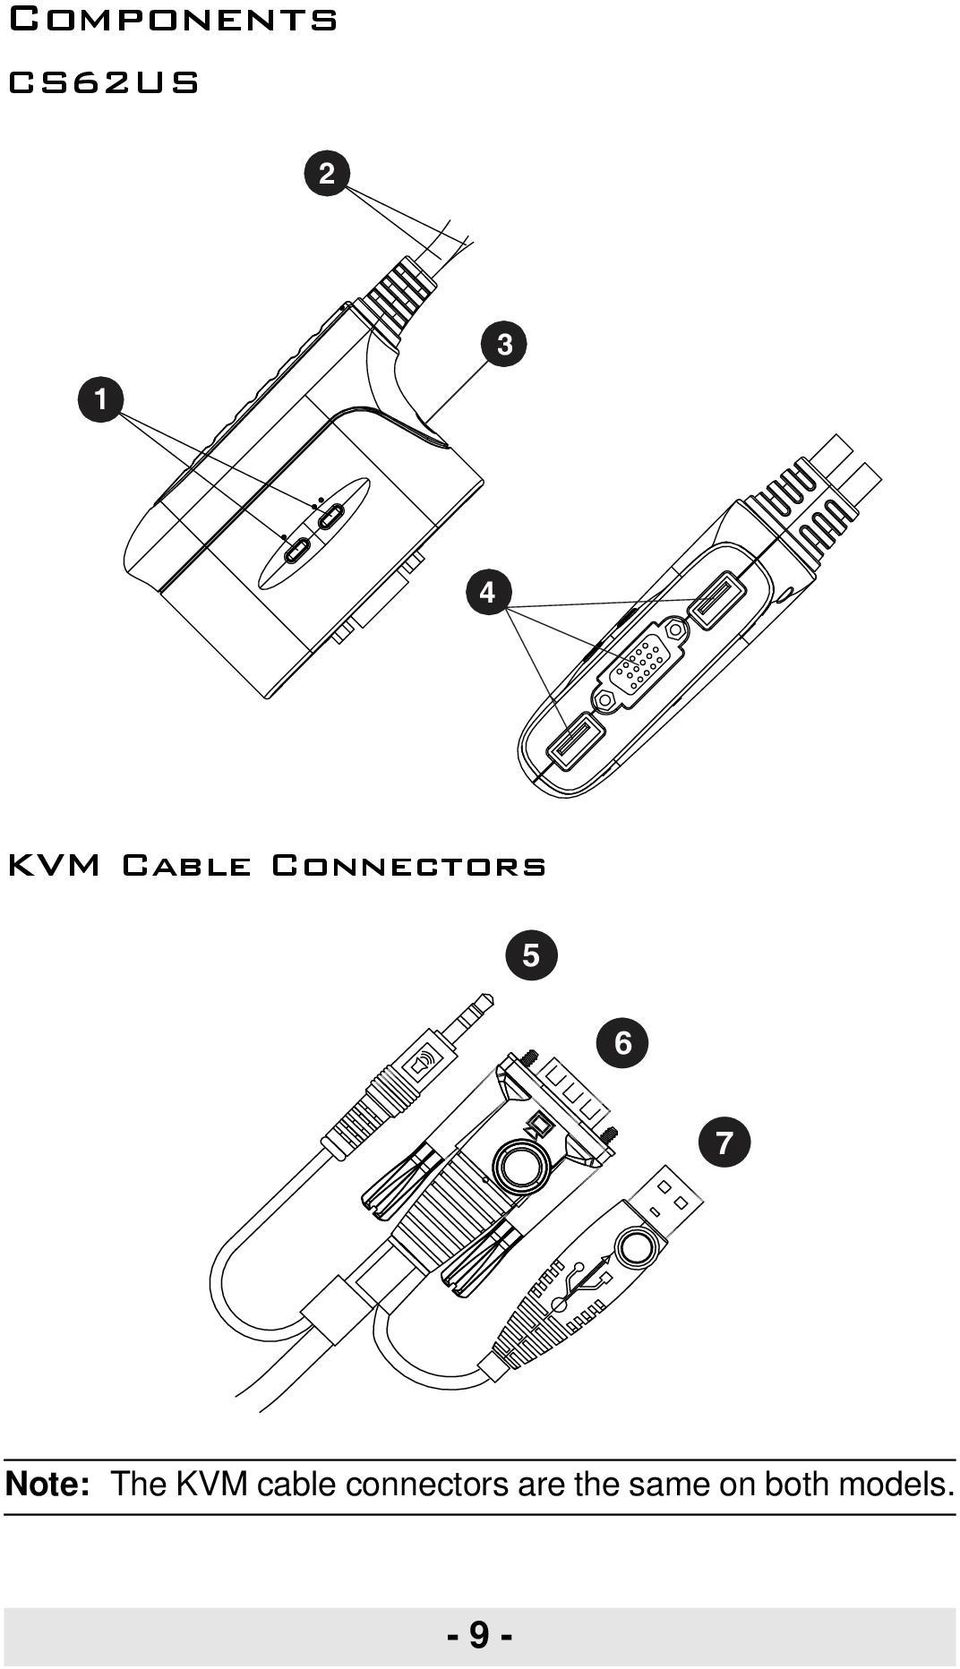 The KVM cable connectors are